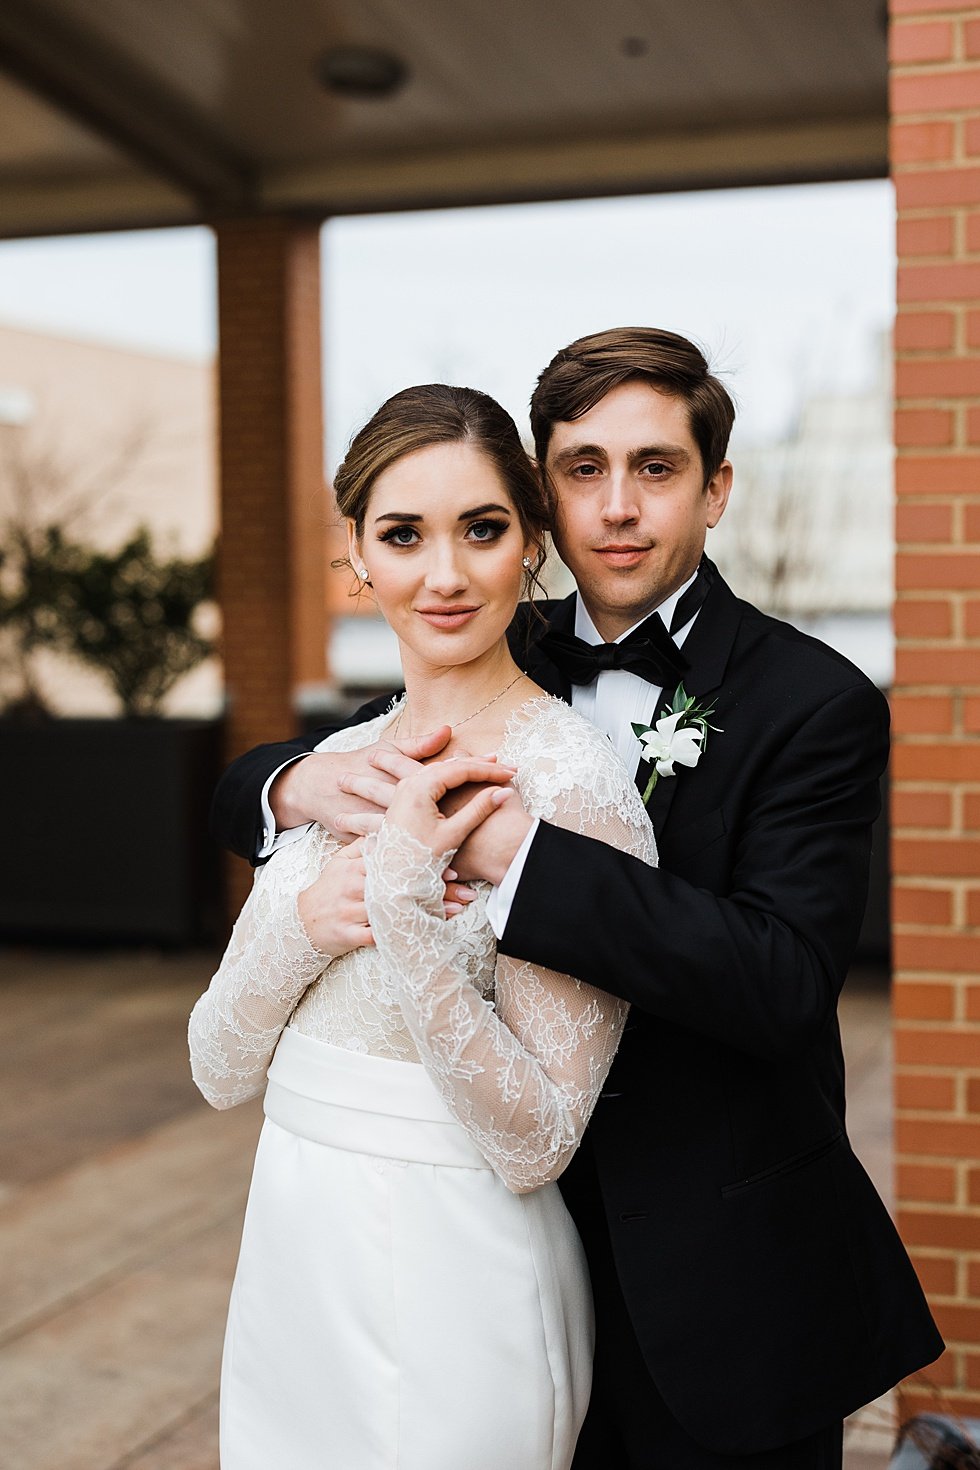  Bride and Groom wedding day portraits at Frazier History museum rooftop and garden. Lauren and Adam's winter wedding at St Agnes Catholic church and the Frazier History Museum. 